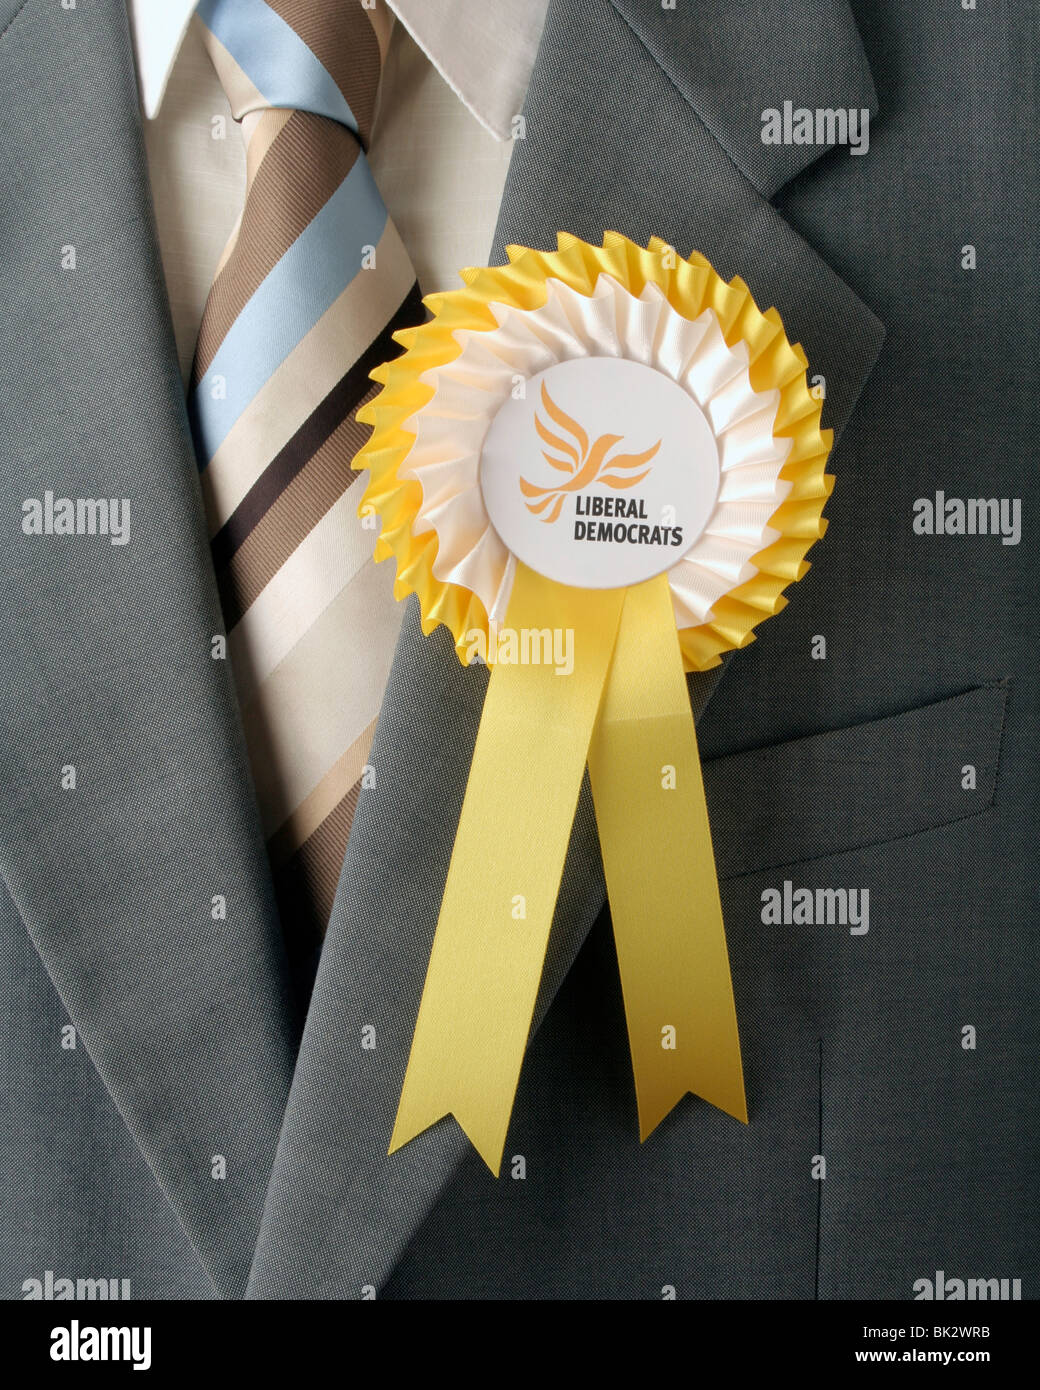 Yellow Liberal Democrats Rosette pinned to Jacket. Stock Photo